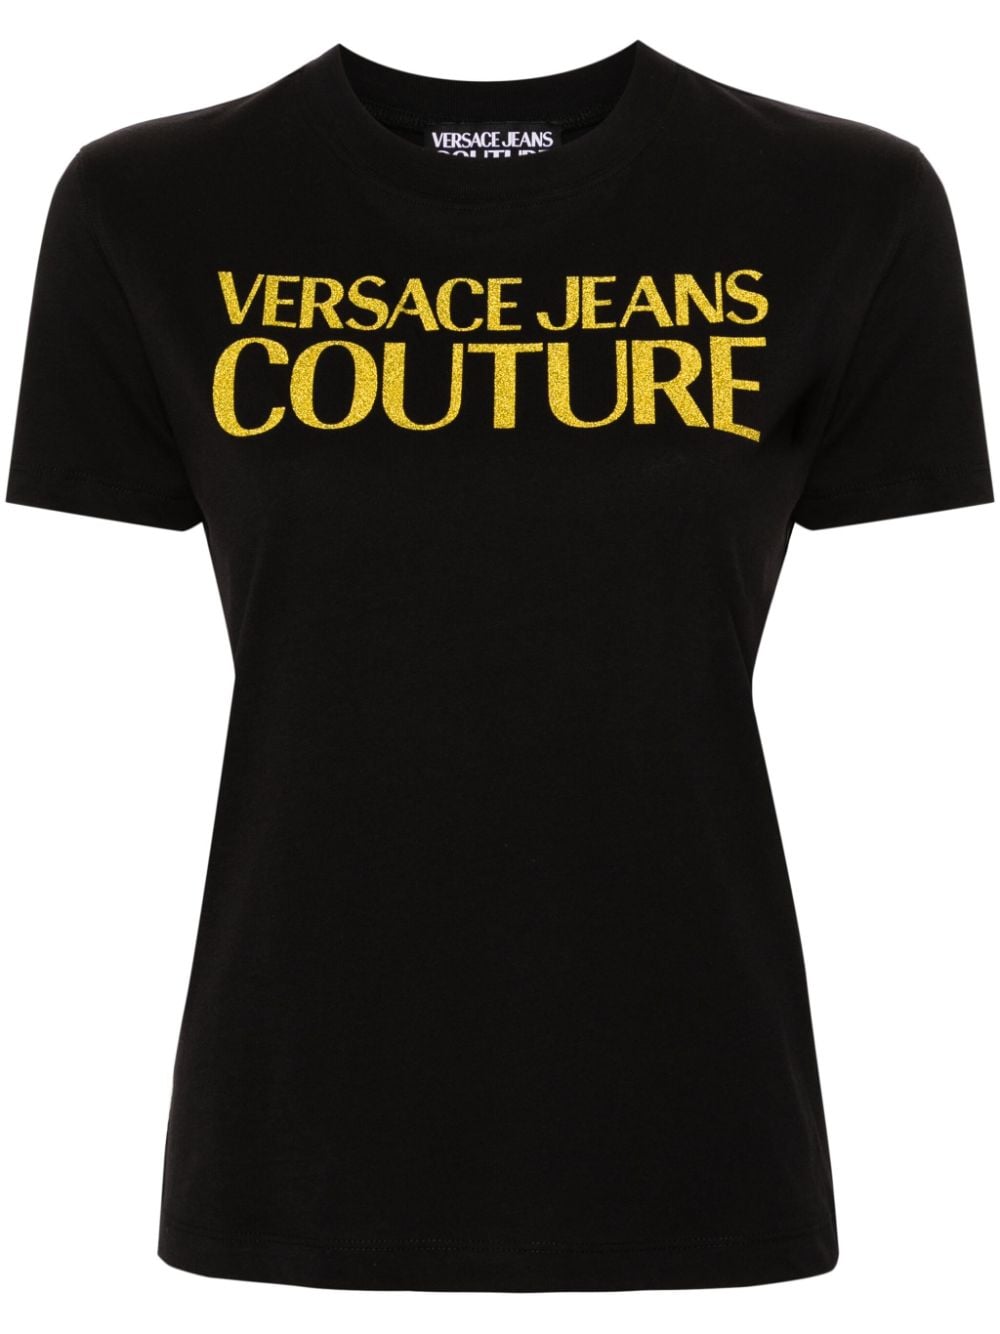 Versace Jeans Couture glittery-logo cotton T-shirt - Black von Versace Jeans Couture